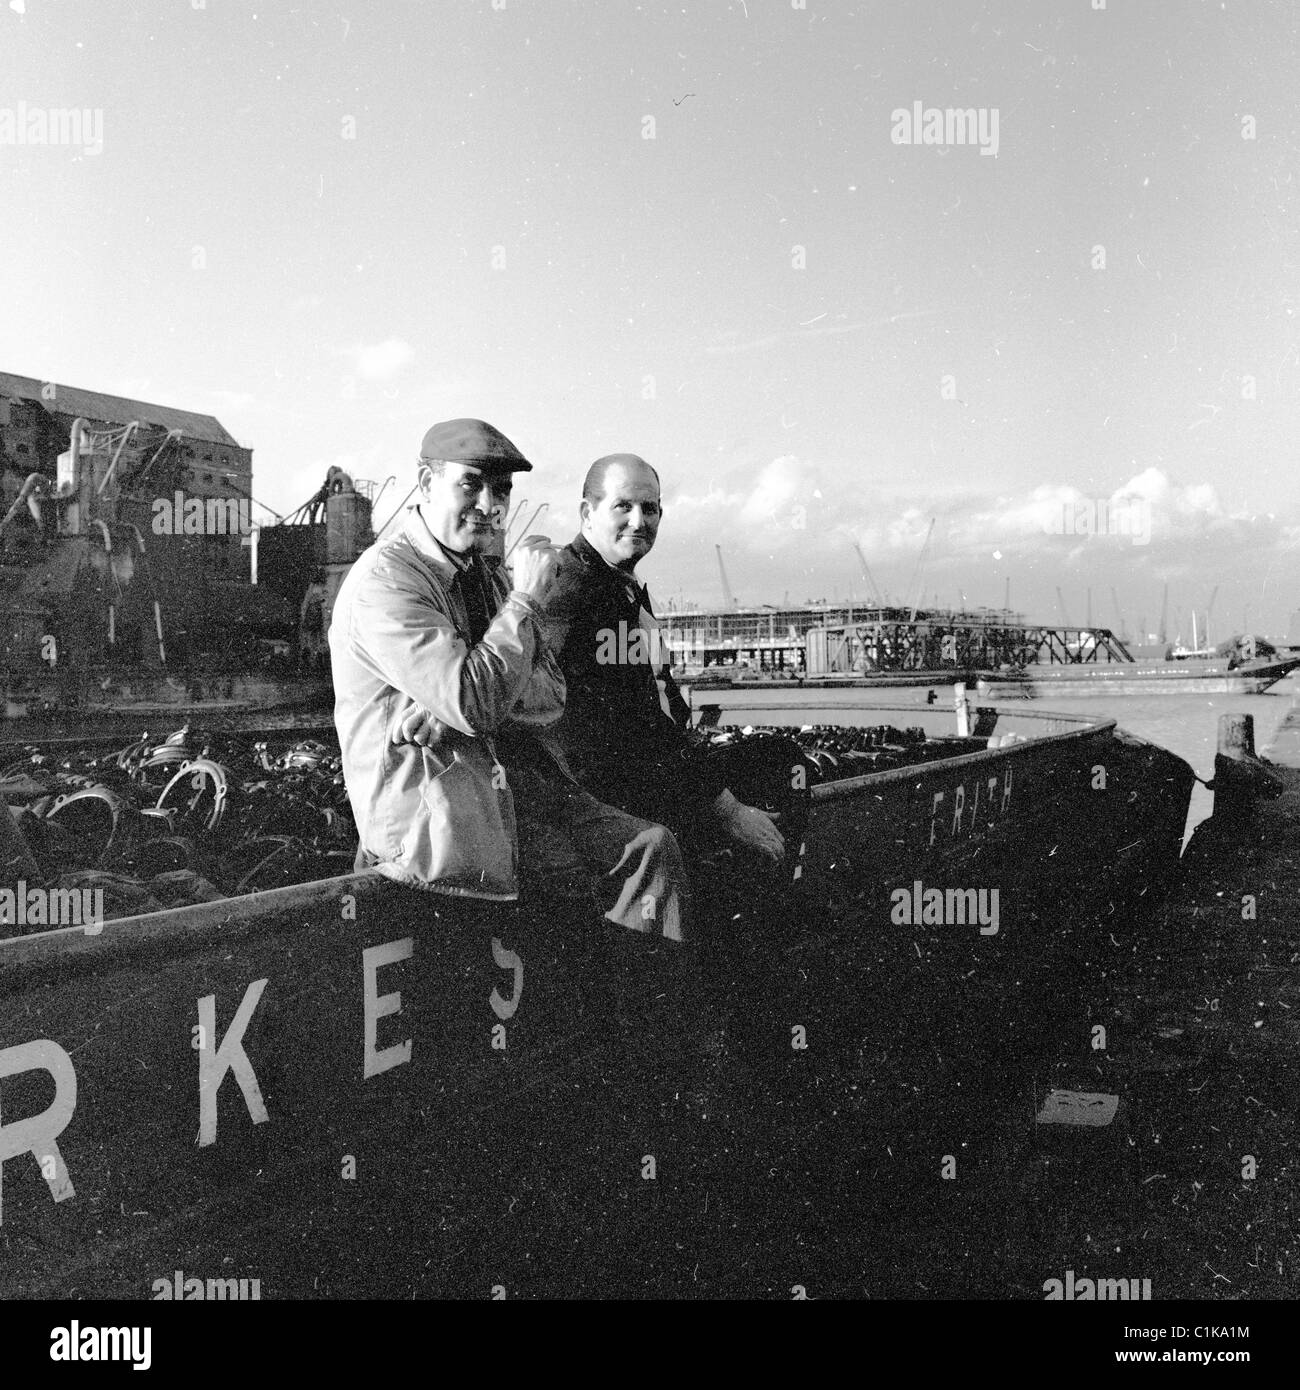 Two dockers take a break sitting on a tug boat at Millwall Dock, East End of London, in this picture taken in the 1950s. Stock Photo